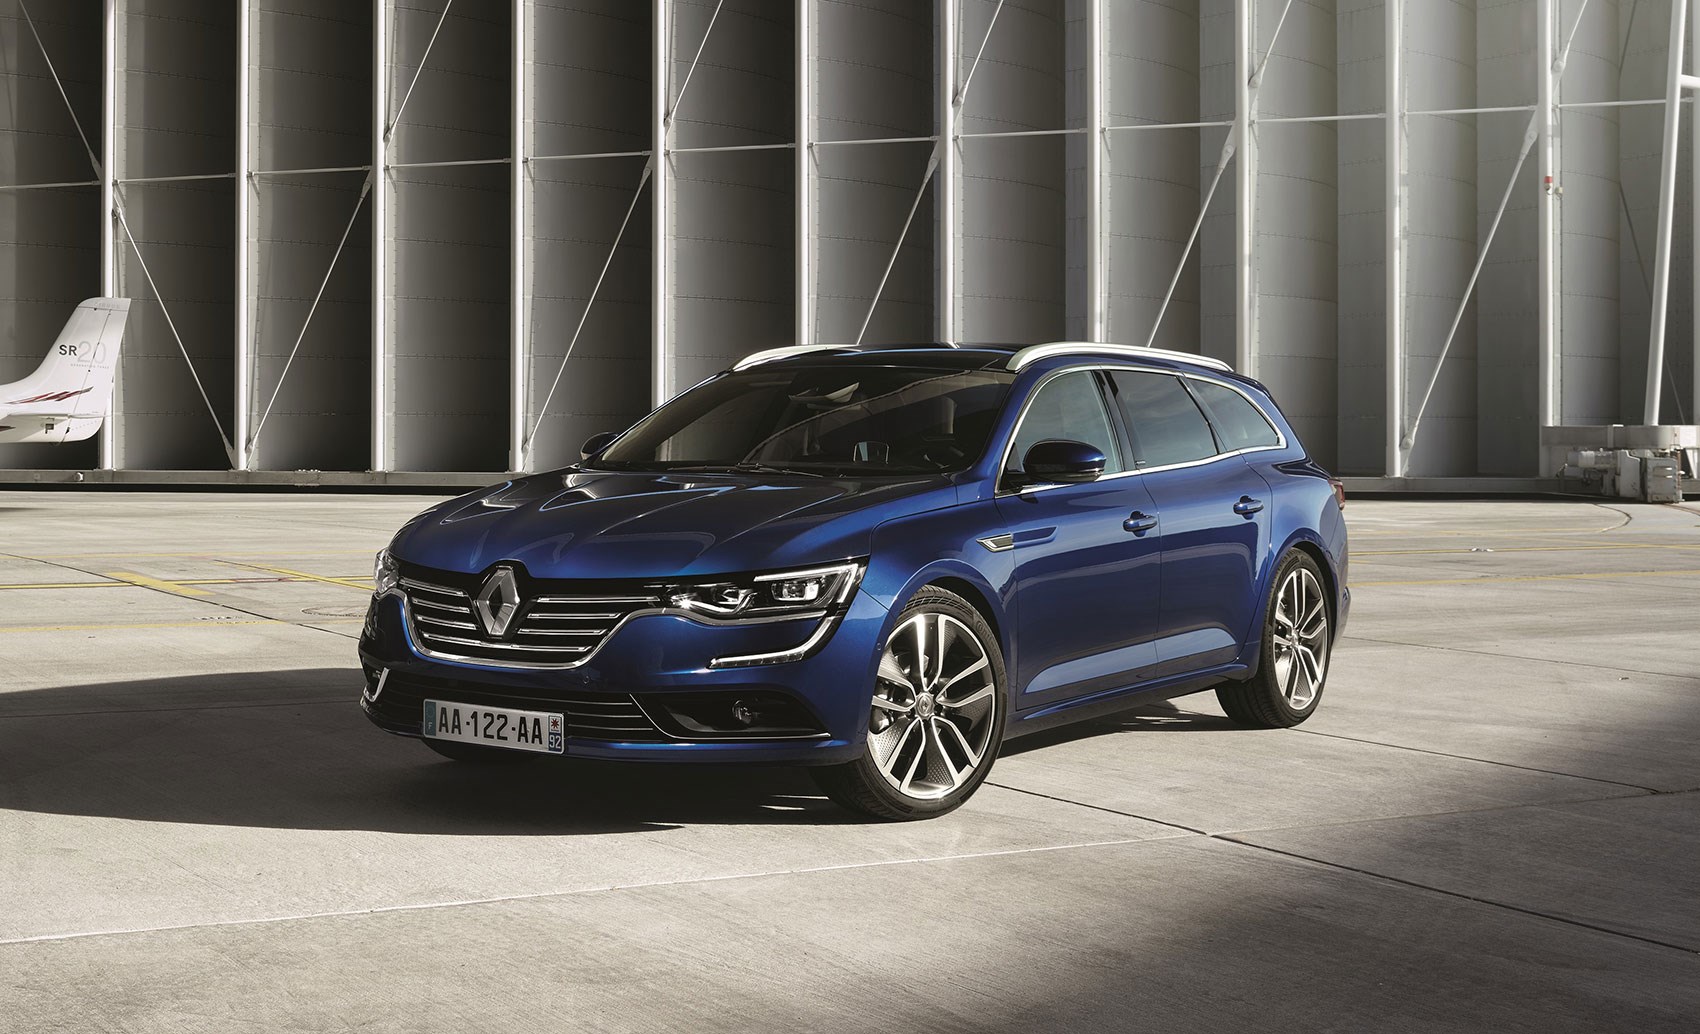 The Renault Talisman is big and French and not coming to the UK